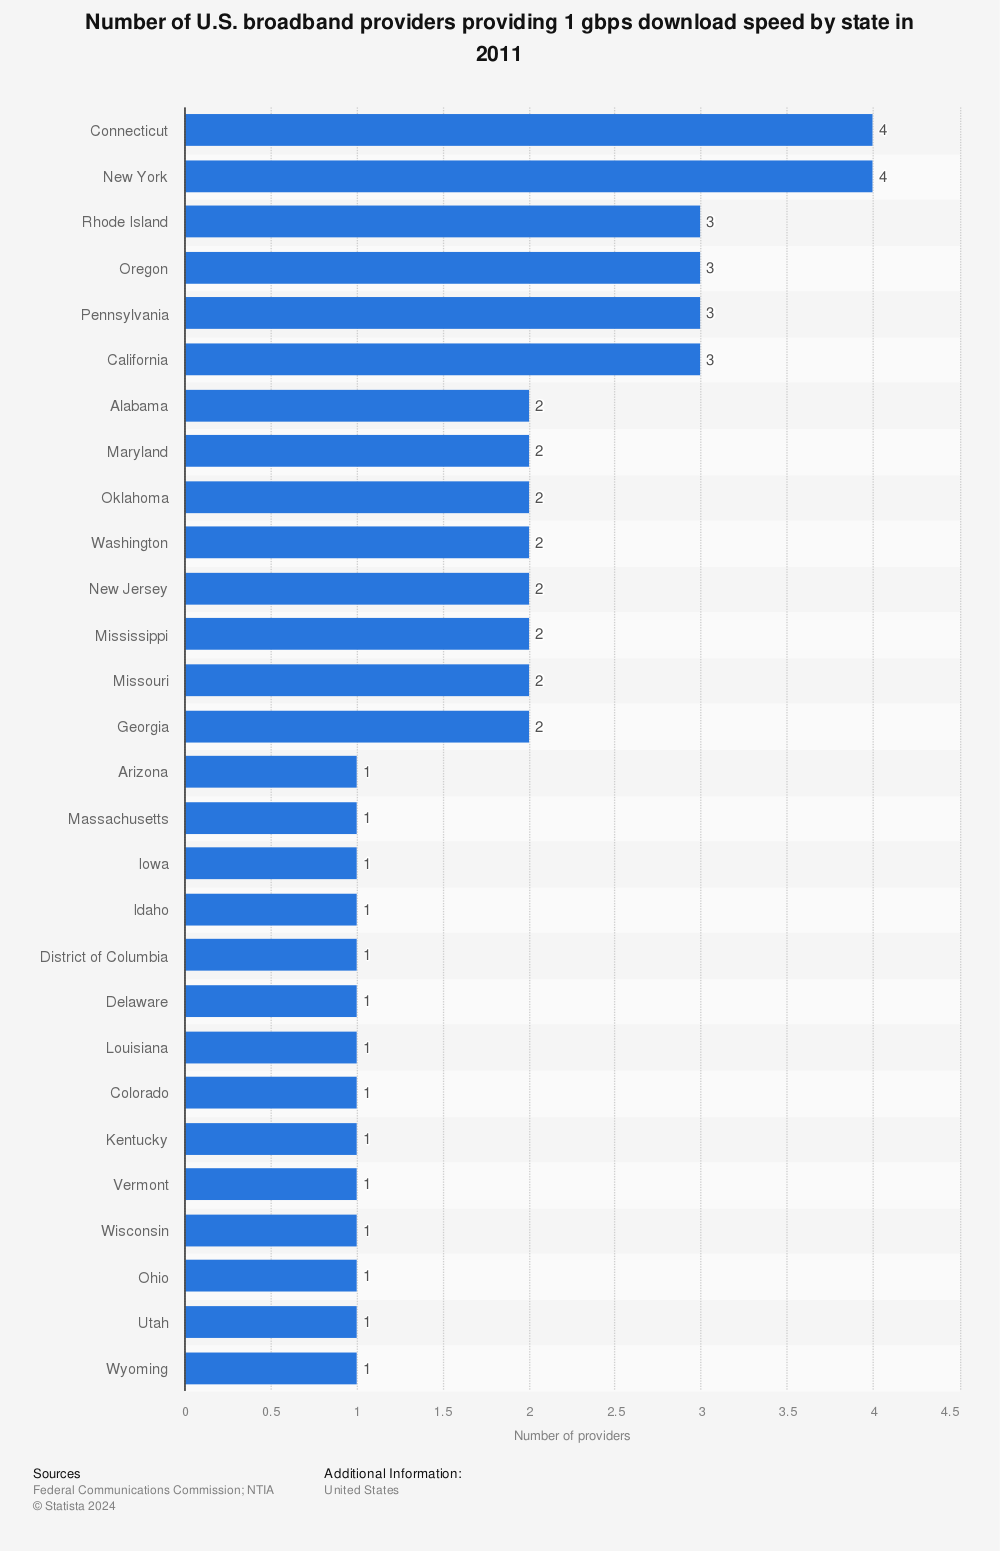 Statistic: Number of U.S. broadband providers providing 1 gbps download speed by state in 2011 | Statista